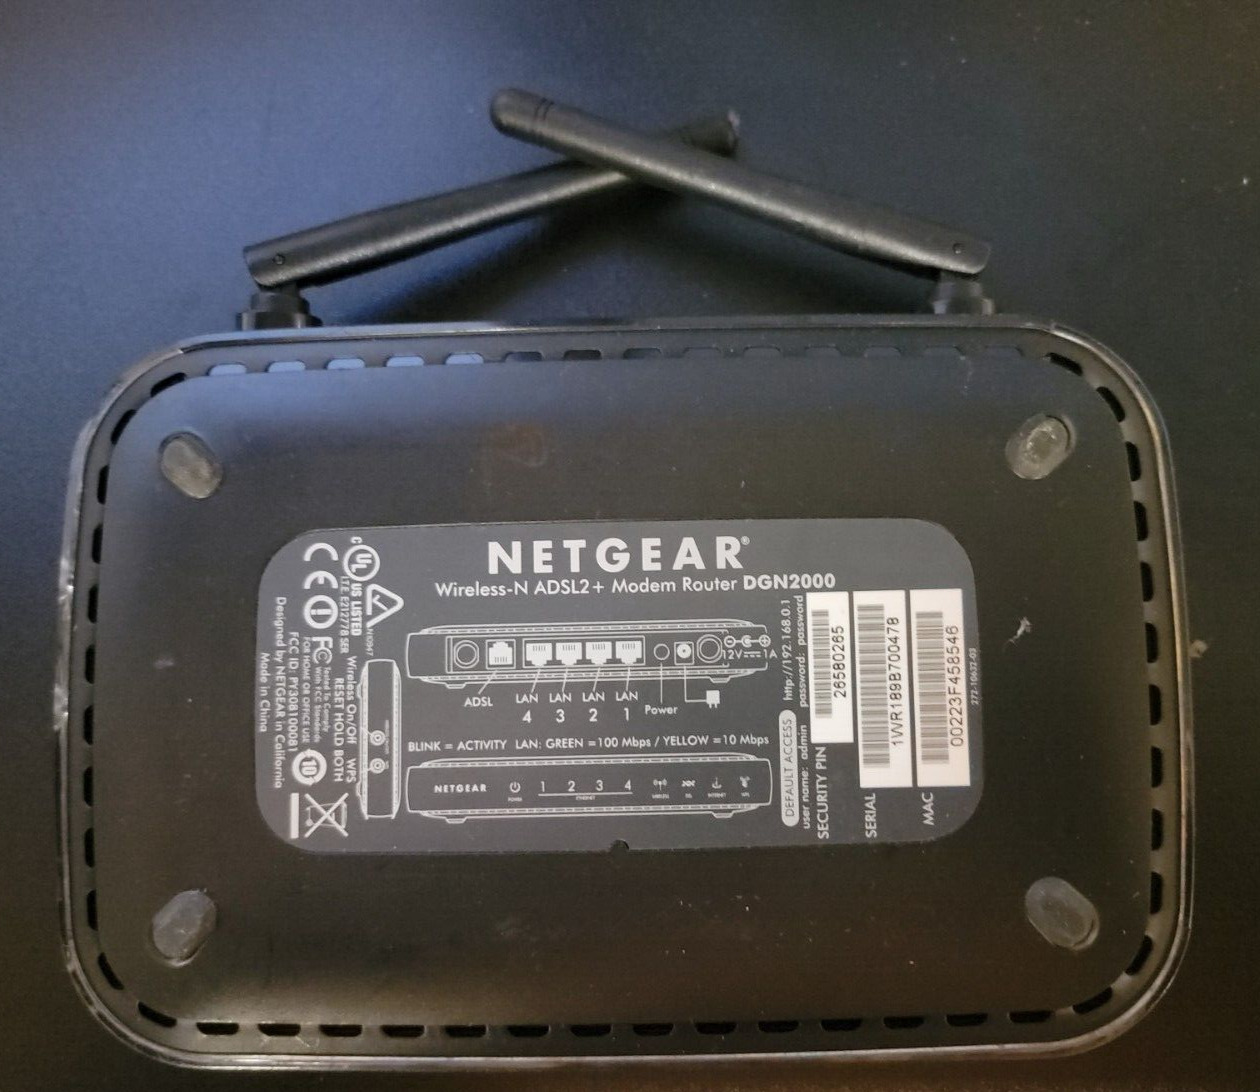 Netgear DGN2000-100NAS 300 Mbps 4-Port Wireless N Router Tested